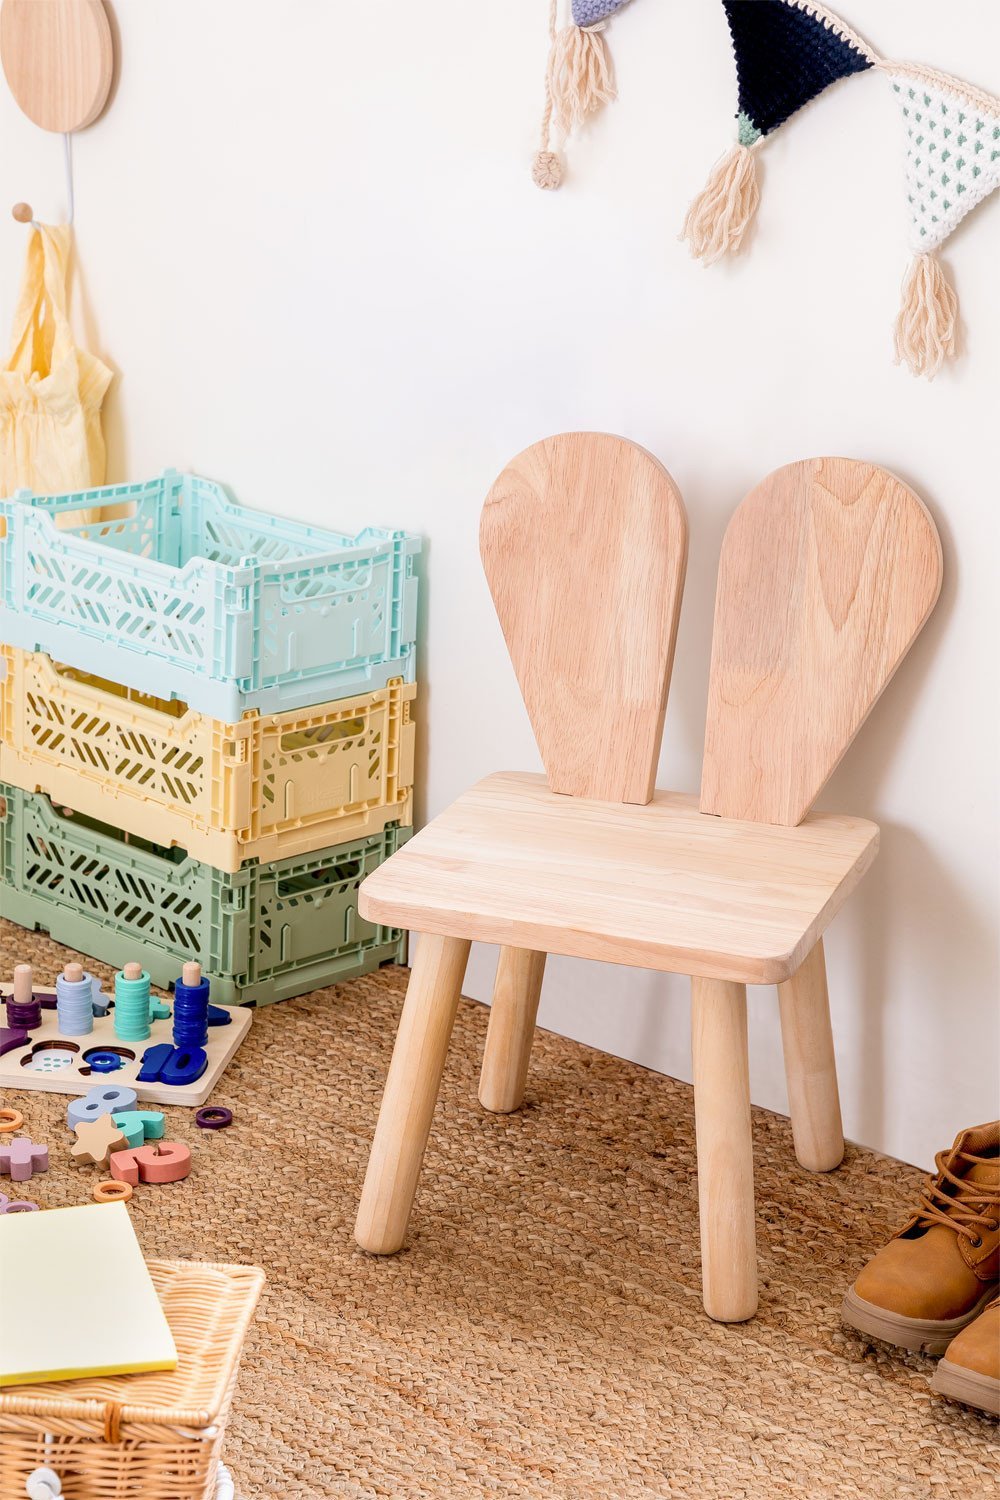 Wooden Chair Buny Style Kids , gallery image 1